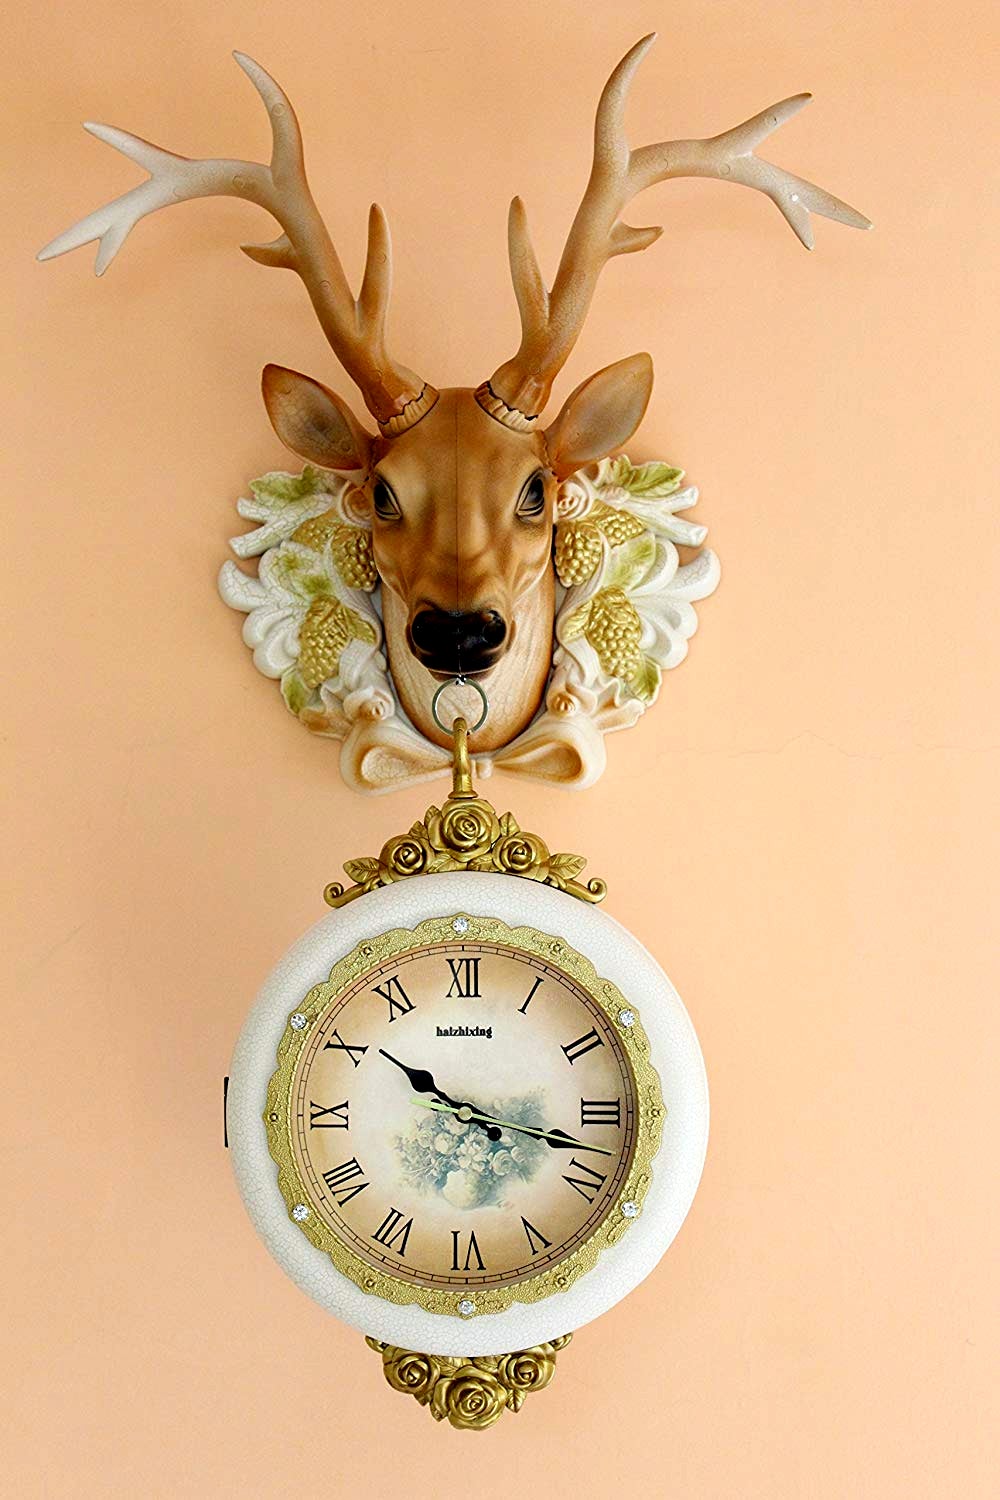 FunkyTradition Royal Multicolor Dual Hanging Reindeer Wall Clock for Home Office Decor and Gifts 75 CM Tall